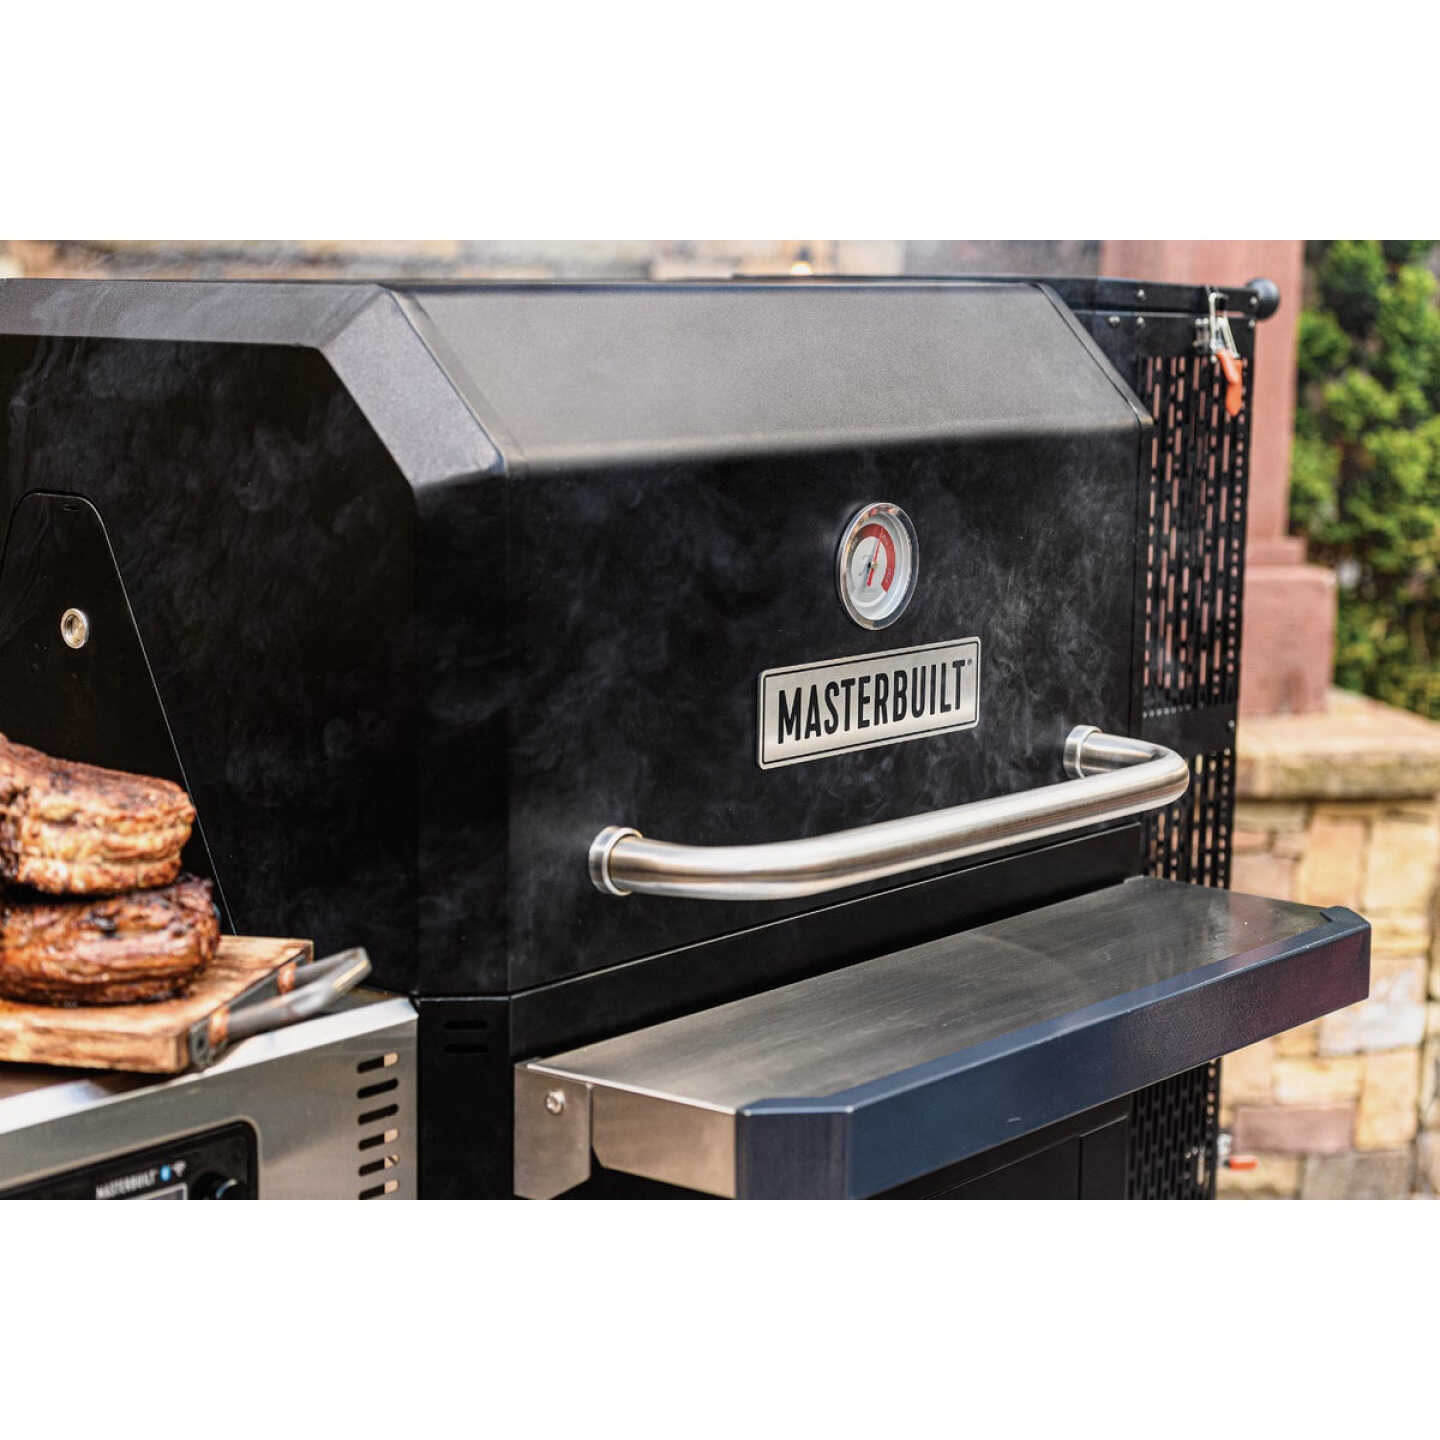 This gravity-fed charcoal grill cooks with tons of barbecue flavor